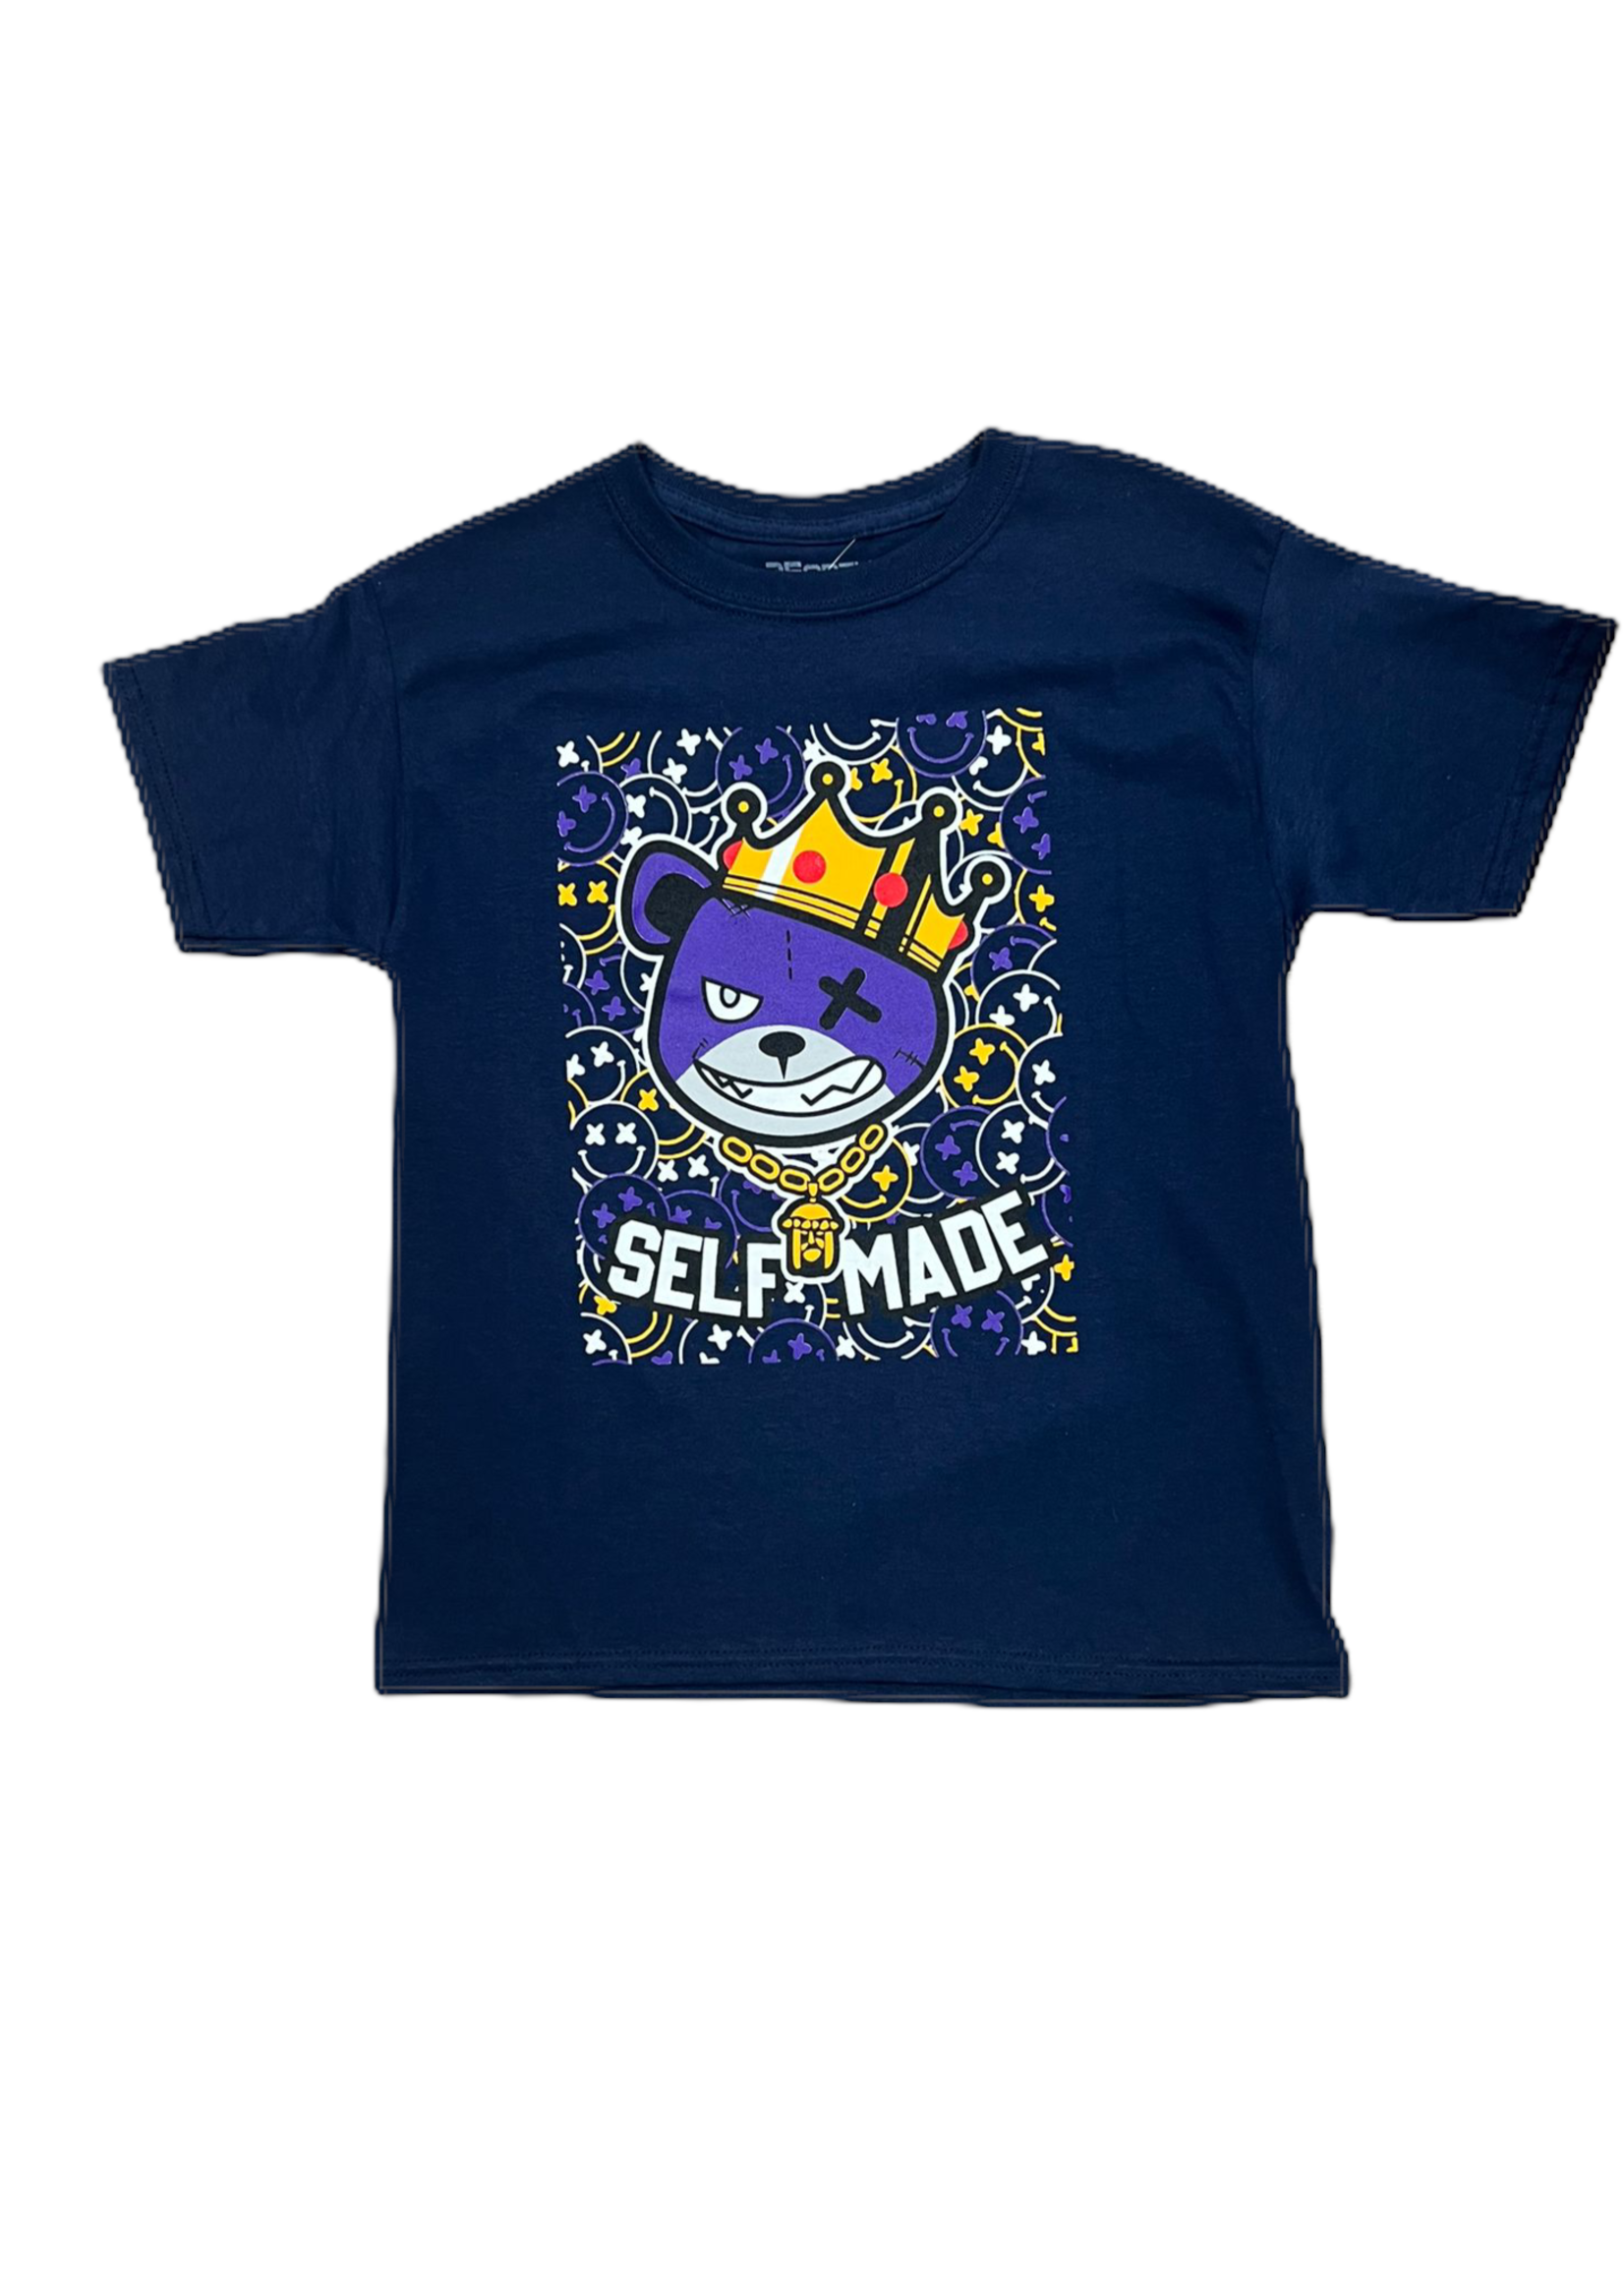 3FORTY SELF MADE  T-SHIRT  - BOYS (Navy/Pink)